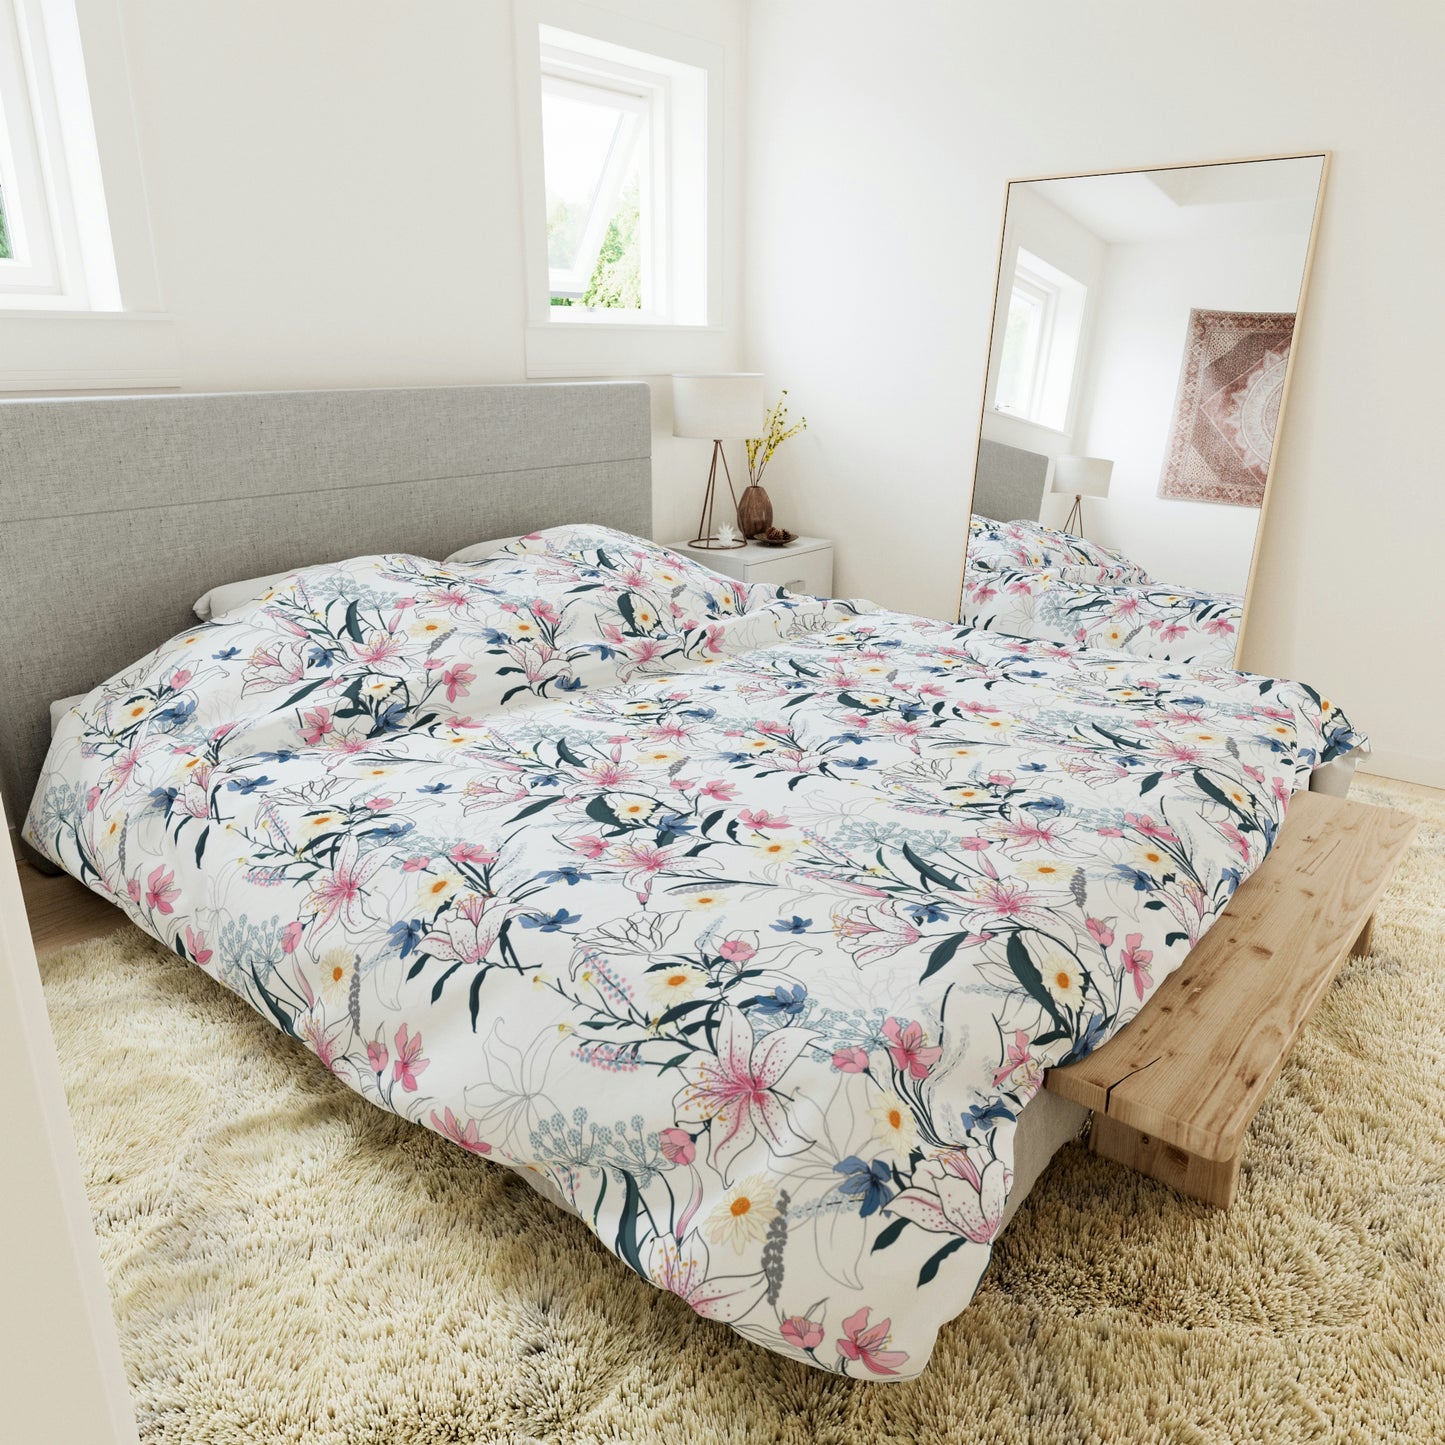 Pink & Yellow Floral Pattern Duvet lying on a bed, microfiber floral duvet cover bedroom accent